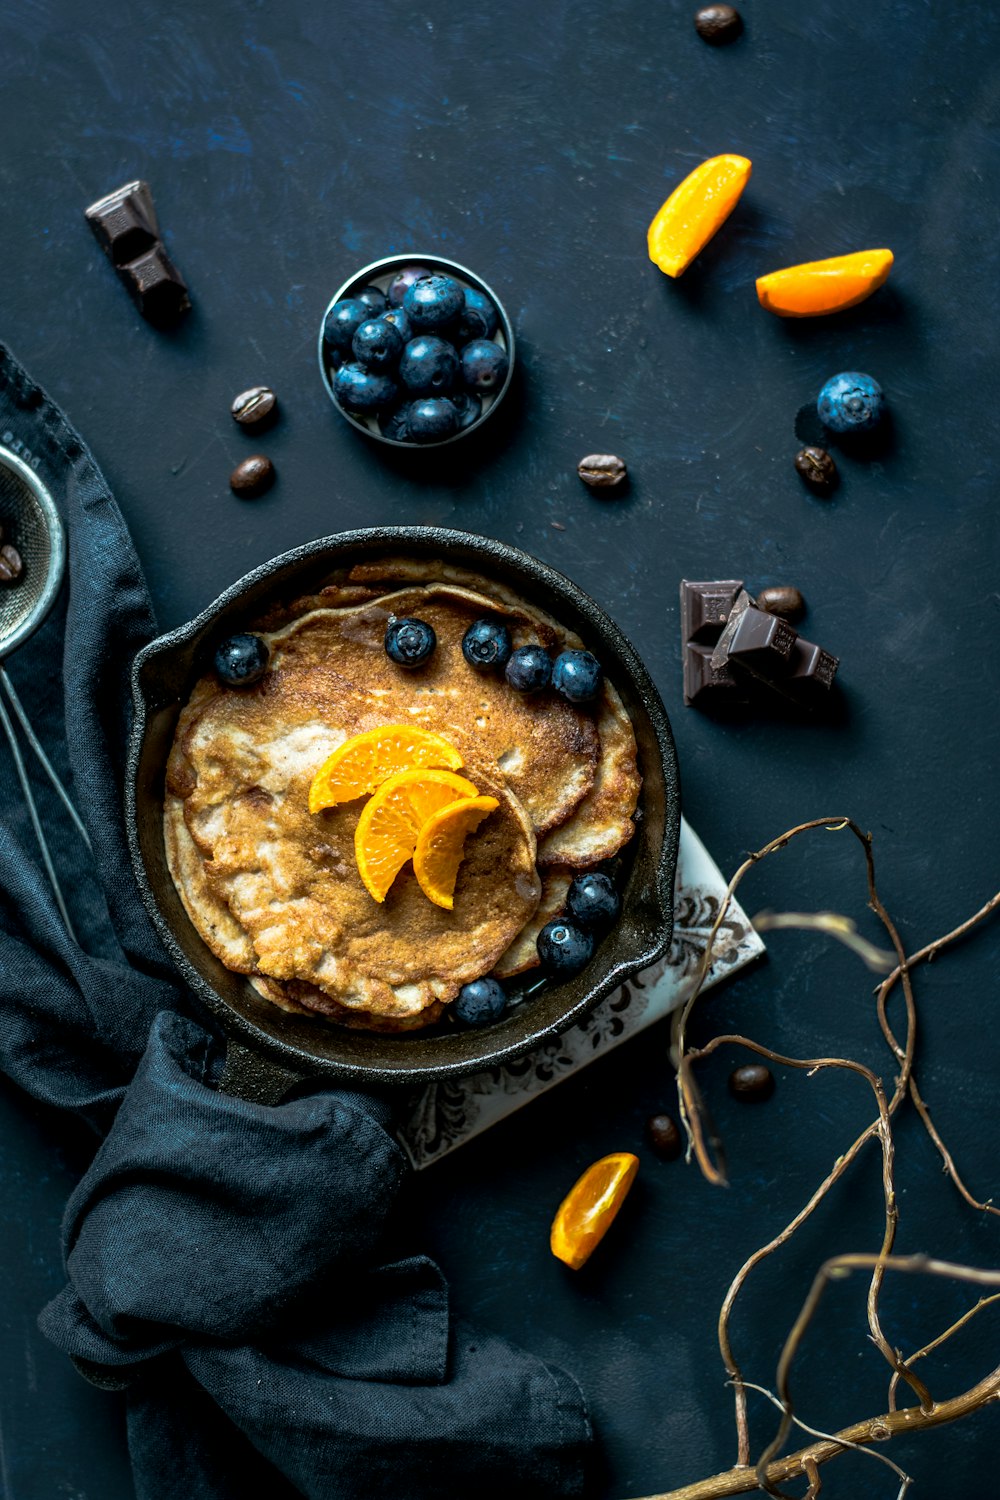 pancake with orange and blueberries beside scattered chocolate and coffee beans